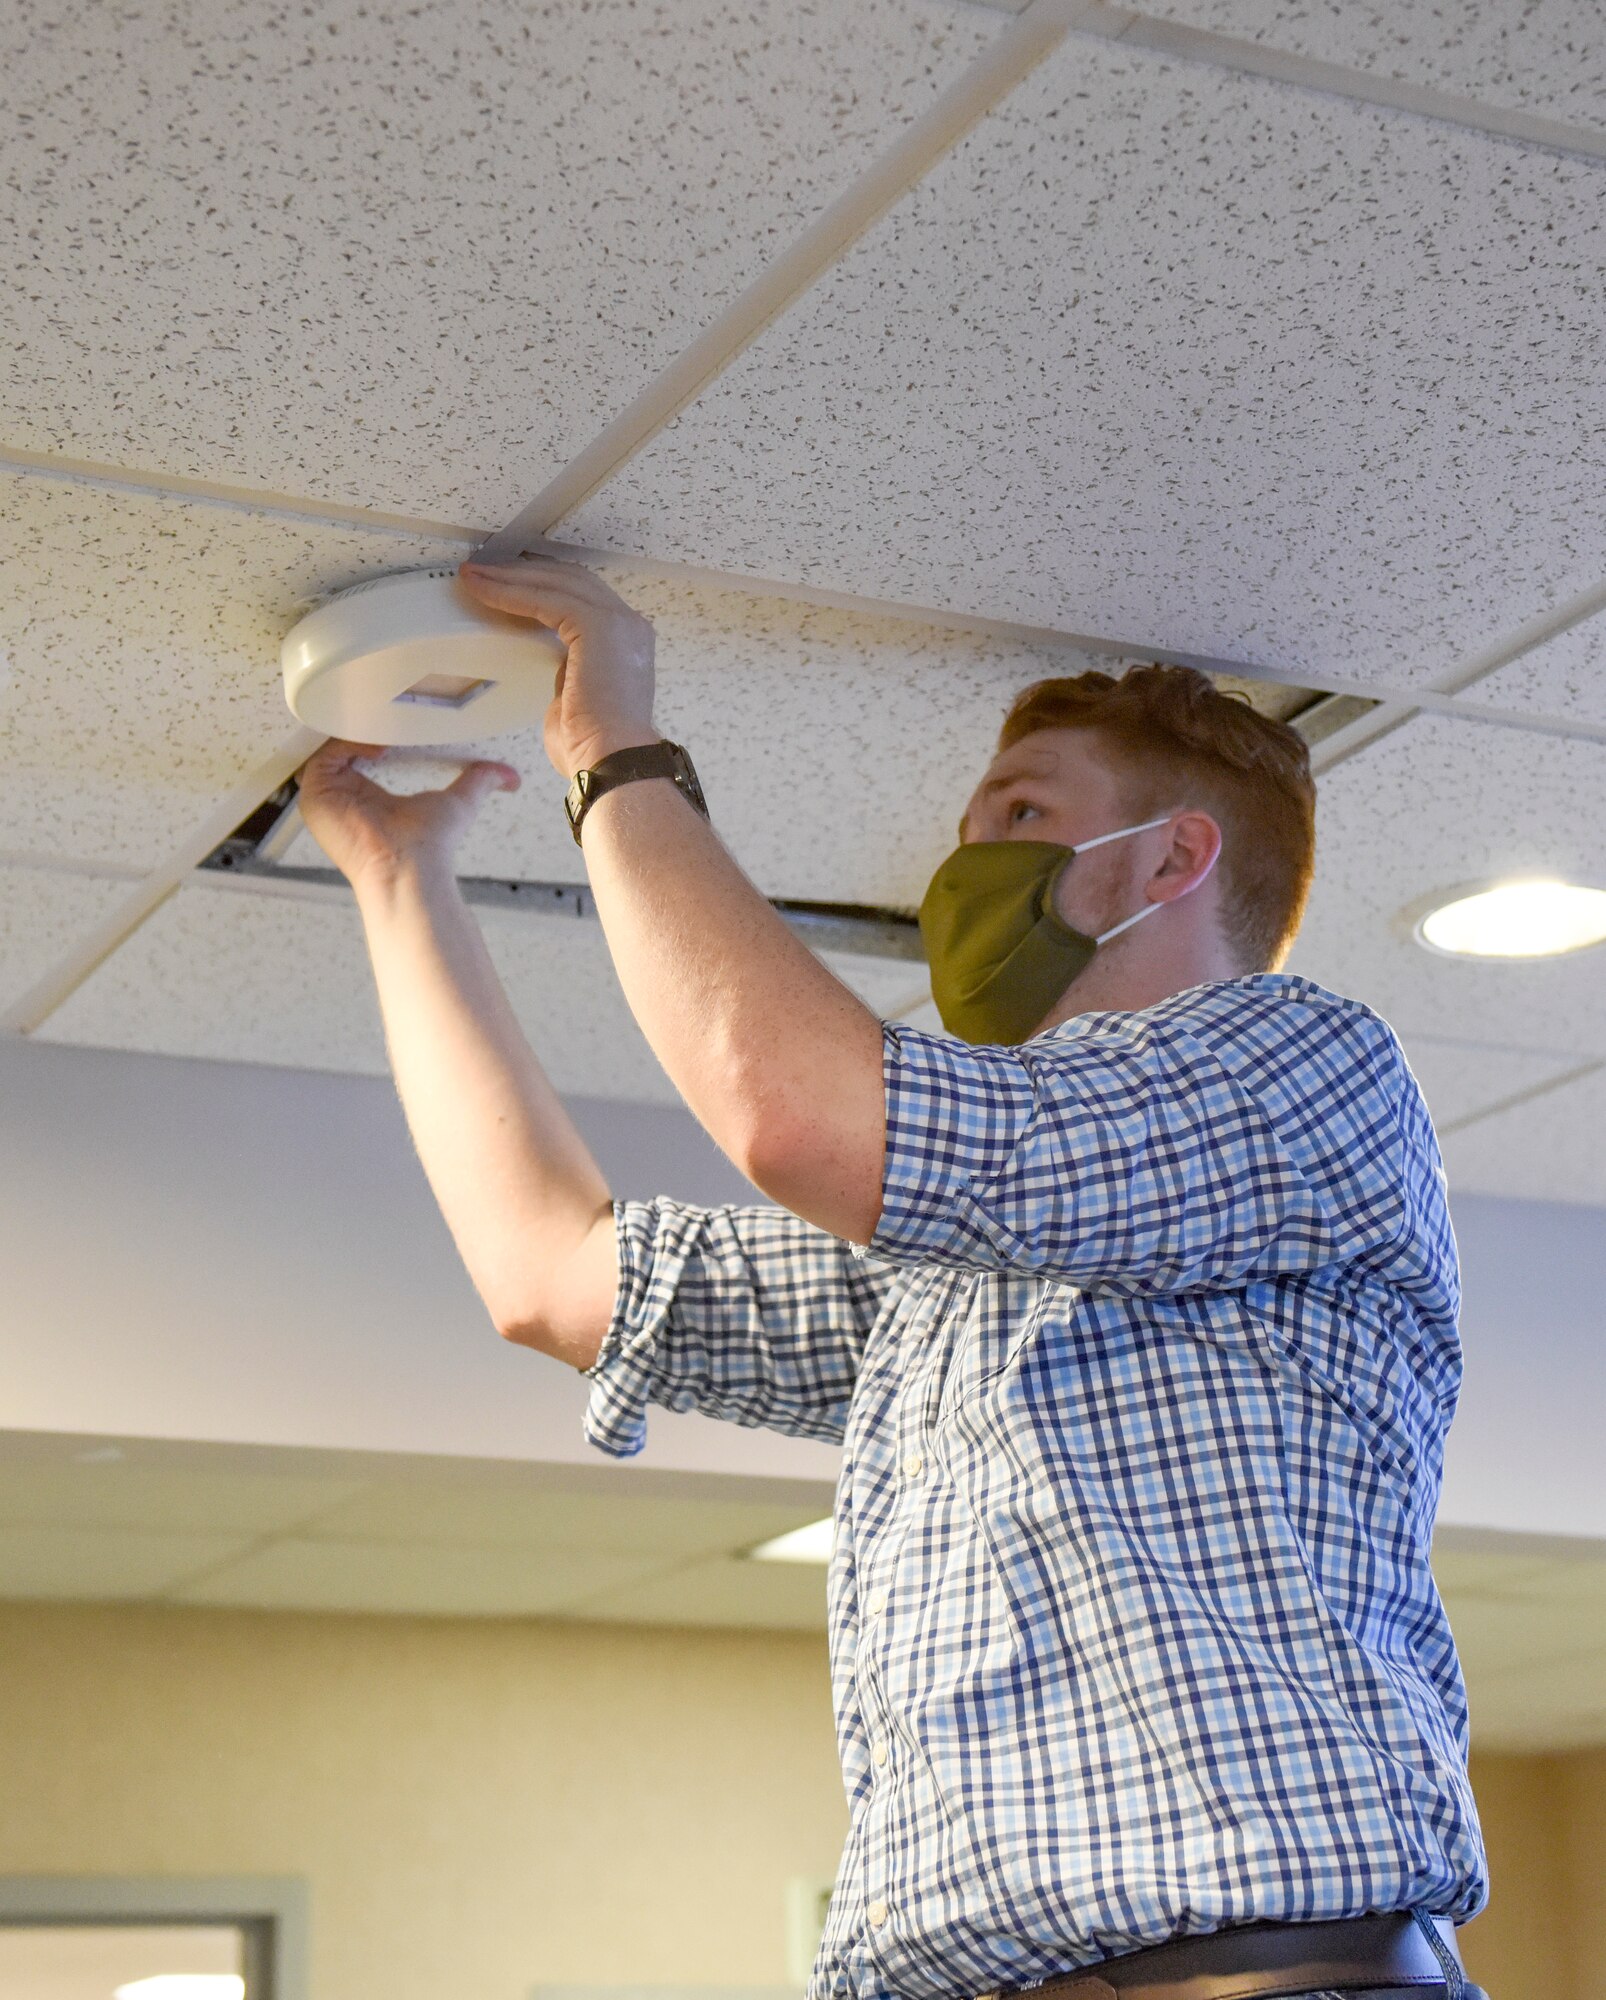 Jordan, a field engineer for FAR UV Technologies, installs an ultraviolet light in the 189th Operations Group ceiling July 16, 2020, at Little Rock Air Force Base, Ark. The UV lighting is environmentally-friendly and mercury-free.